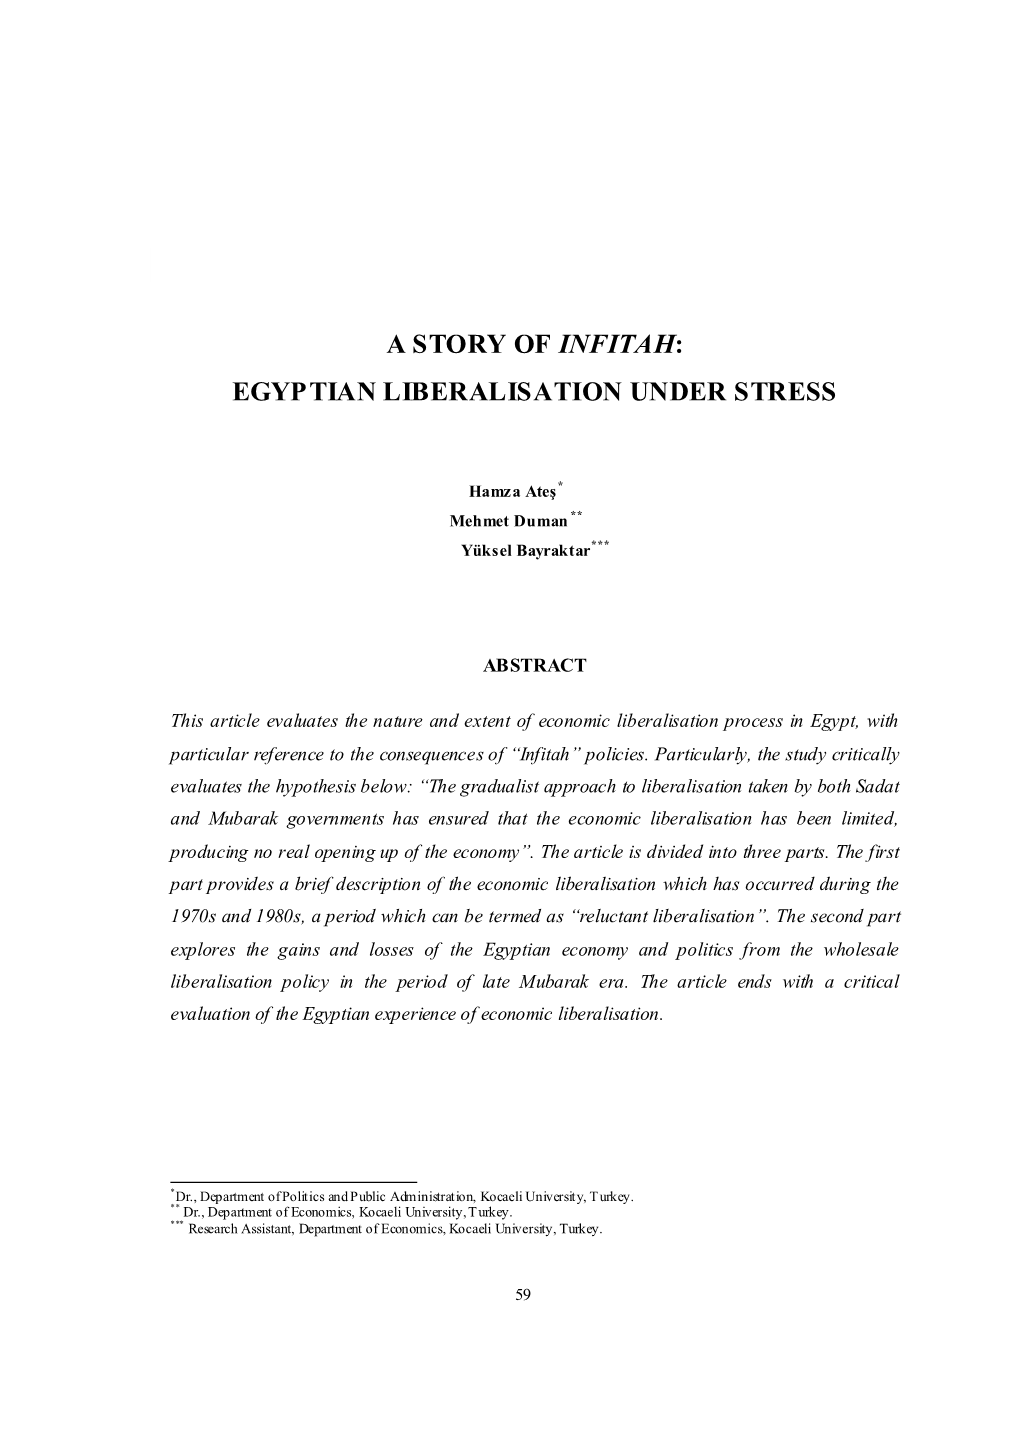 A Story of Infitah: Egyptian Liberalisation Under Stress